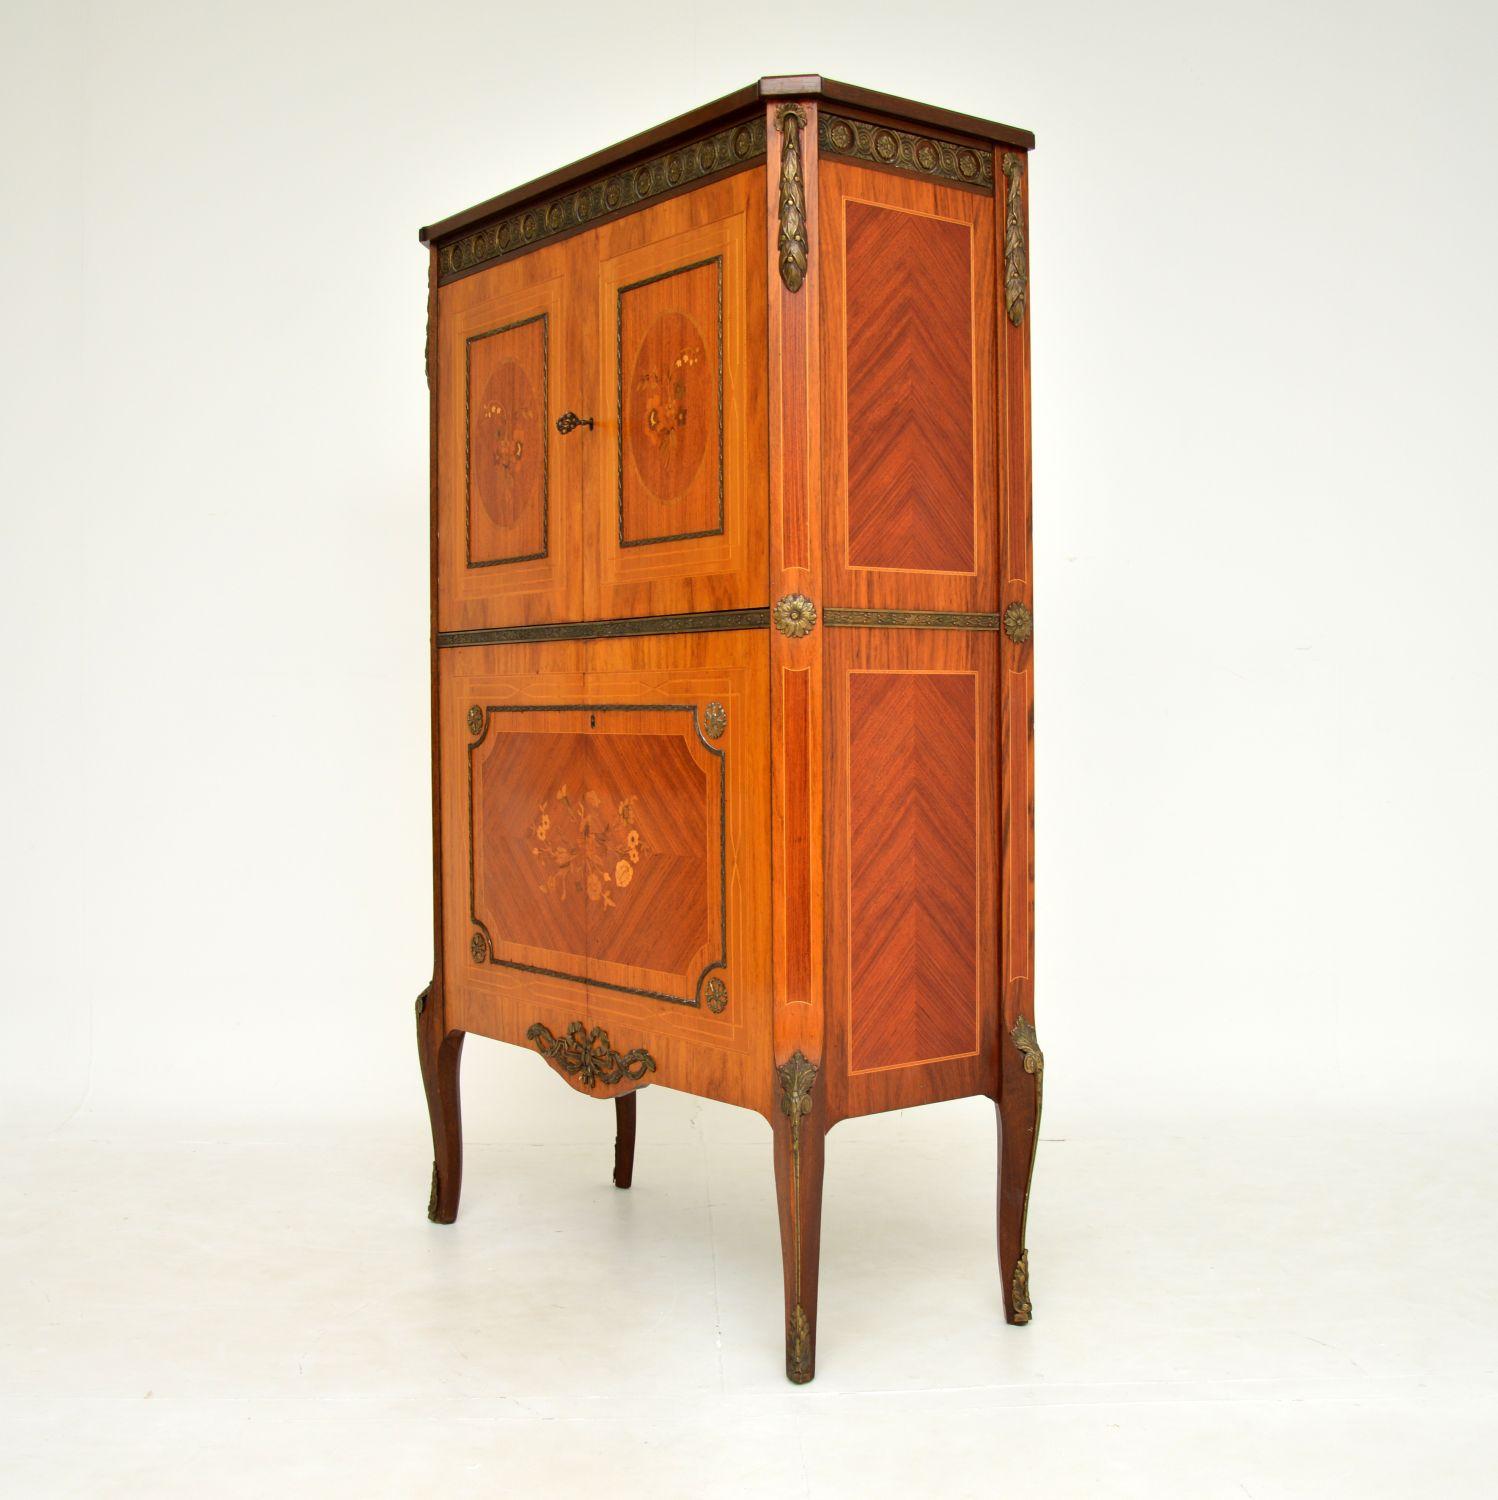 Gilt Antique French Inlaid Drinks Cabinet